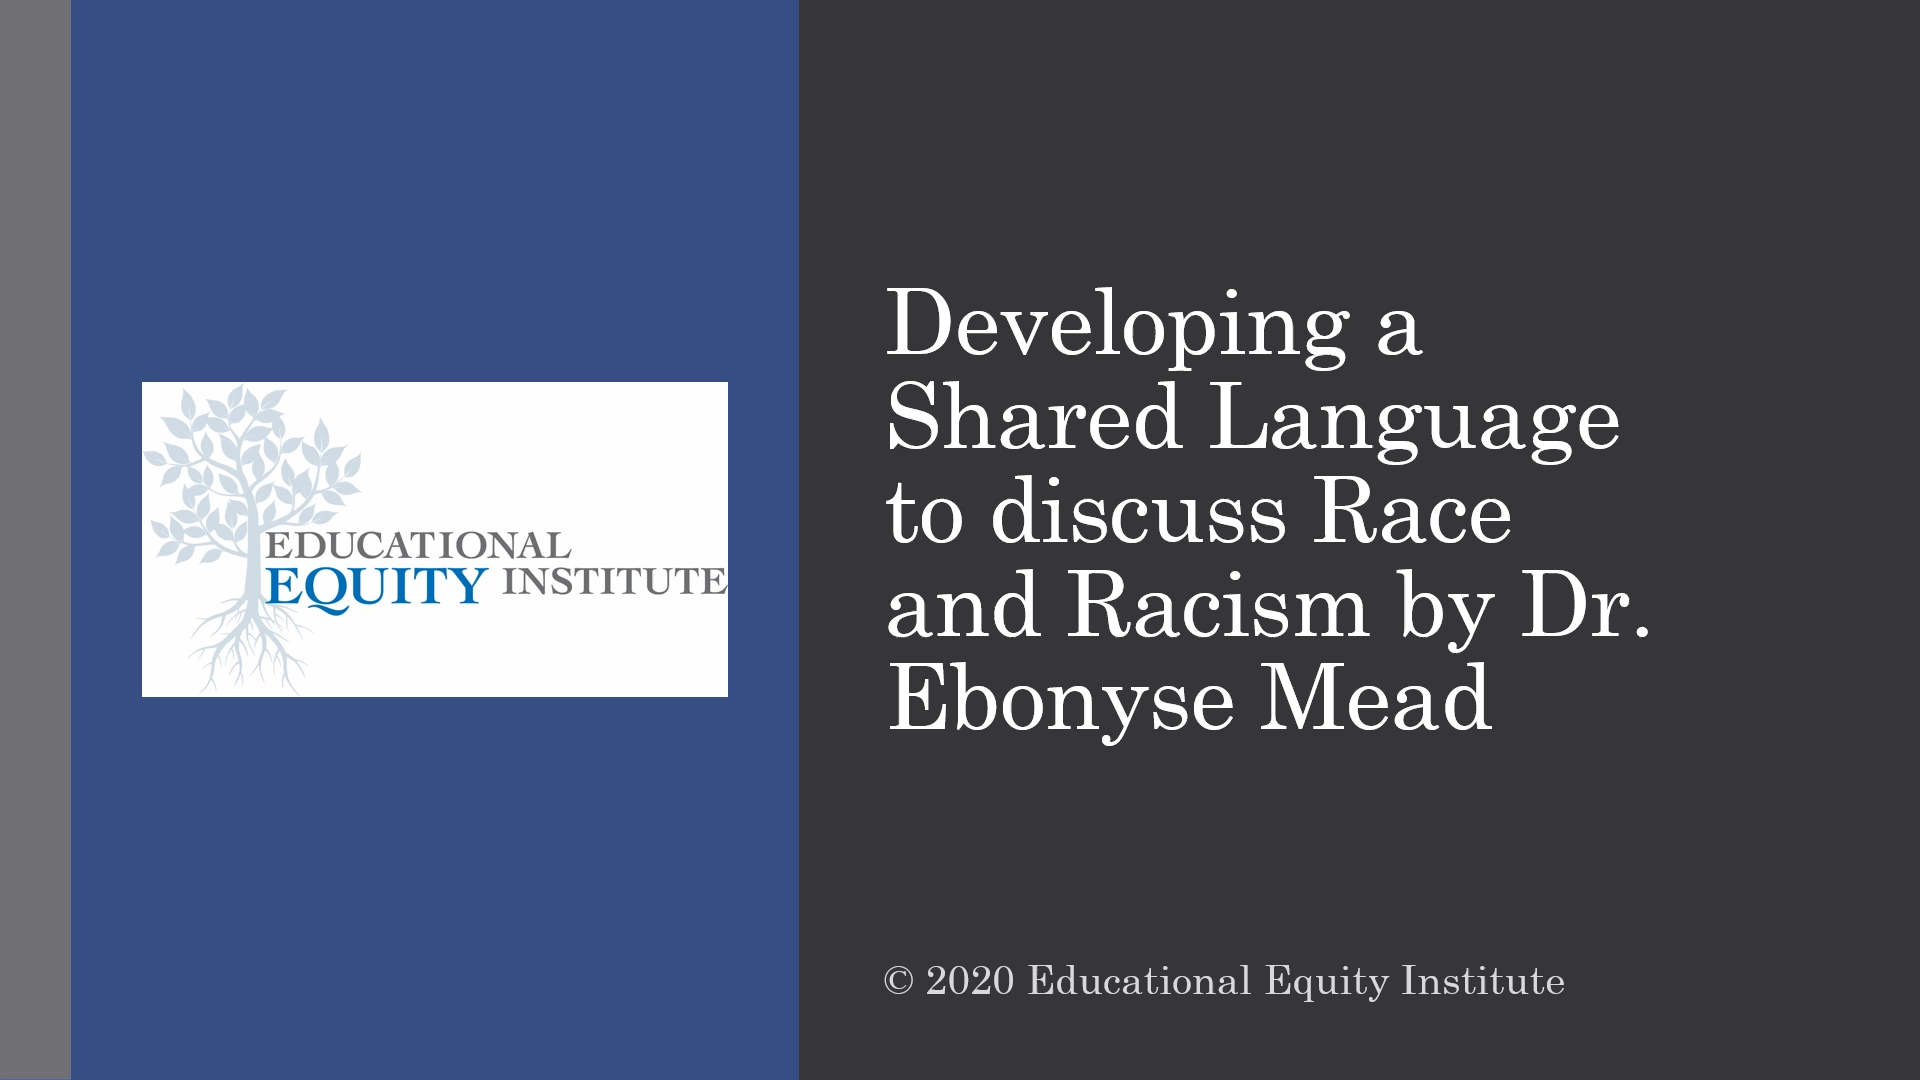 Developing a Shared Language to Discuss Race and Racism Training Module